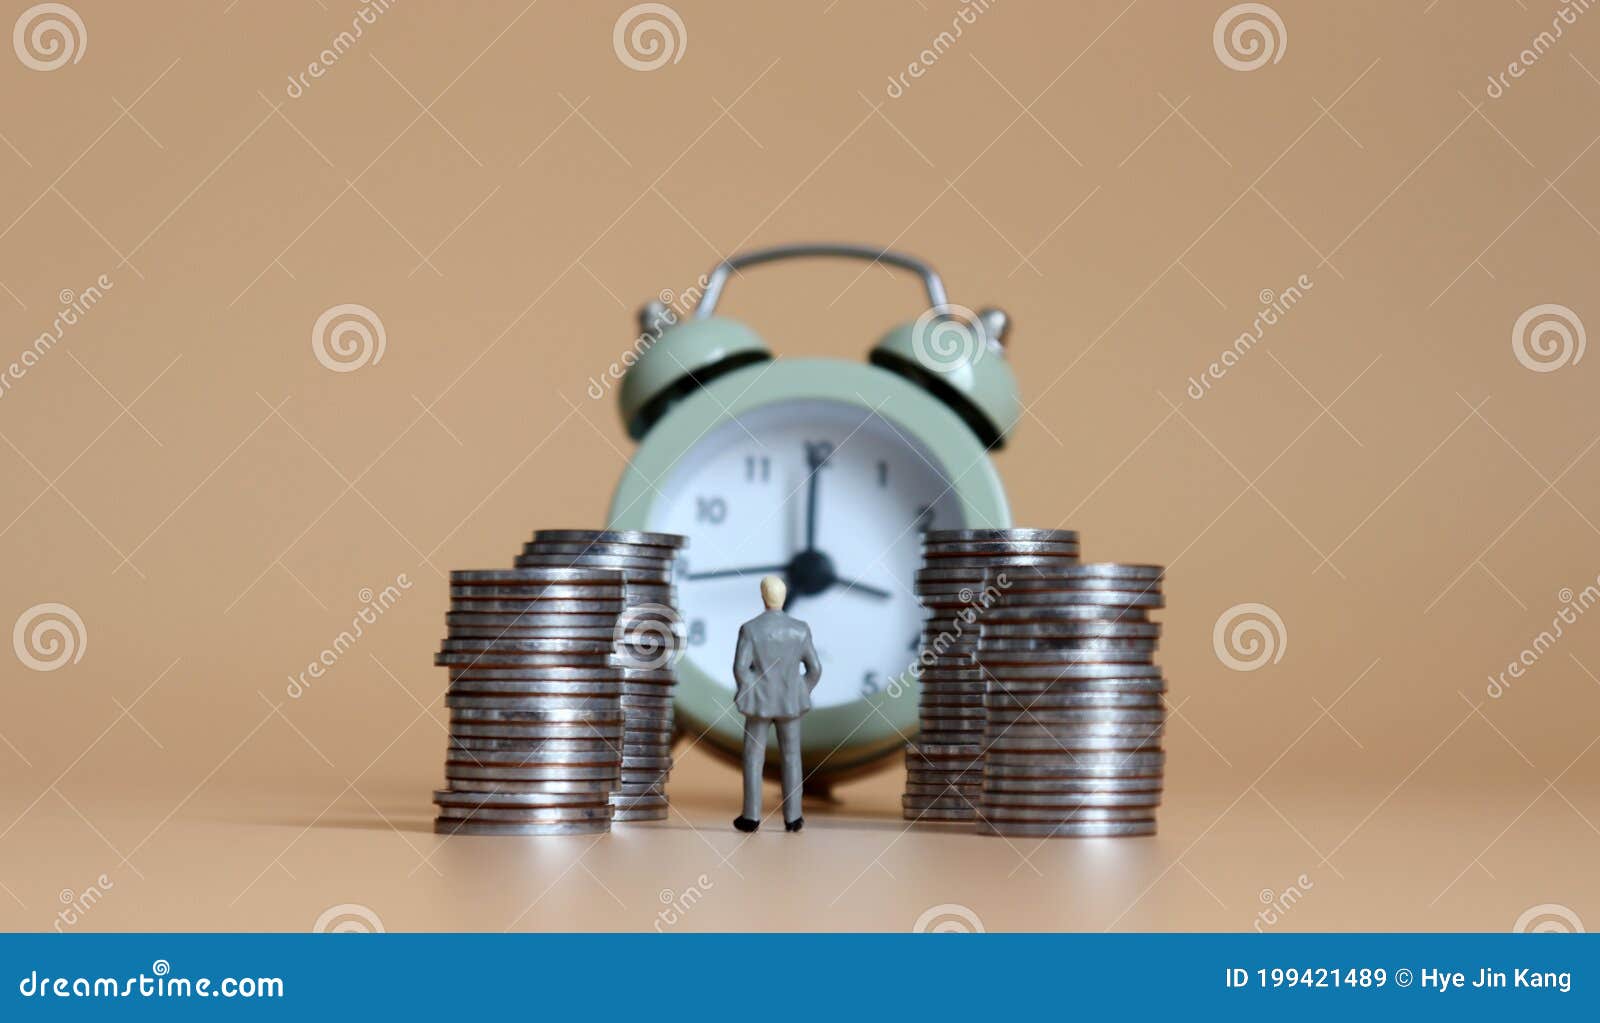 miniature people with an alarm clock and a pile of coins.